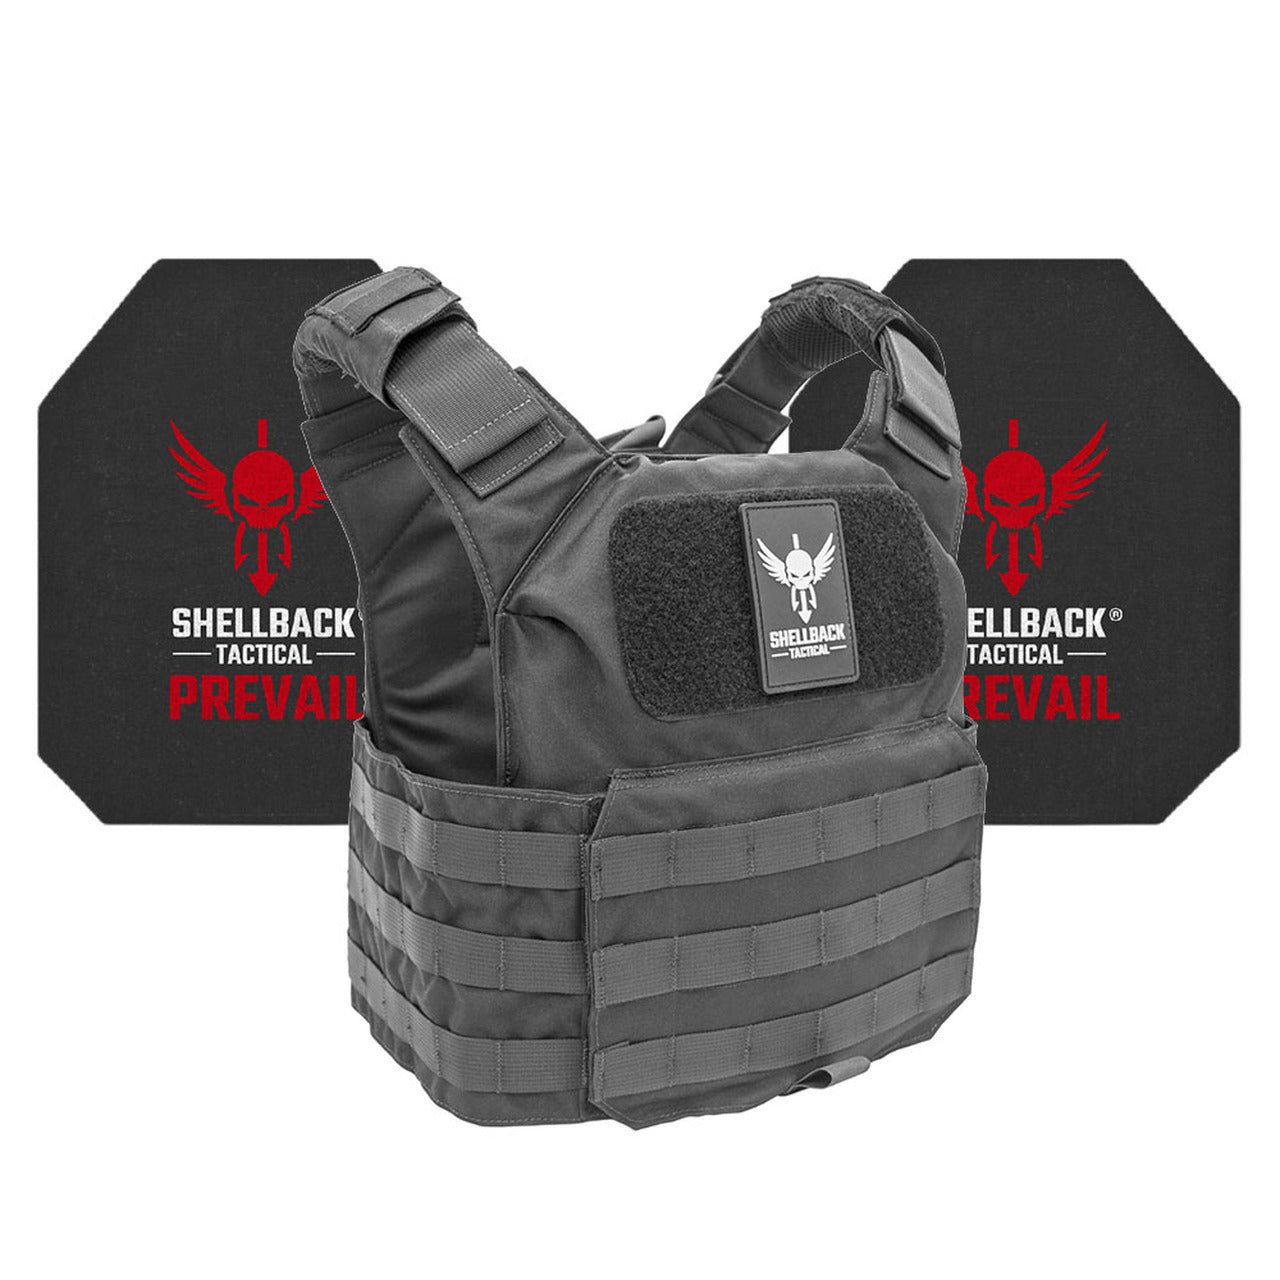 A black vest with the Shellback Tactical logo on it.